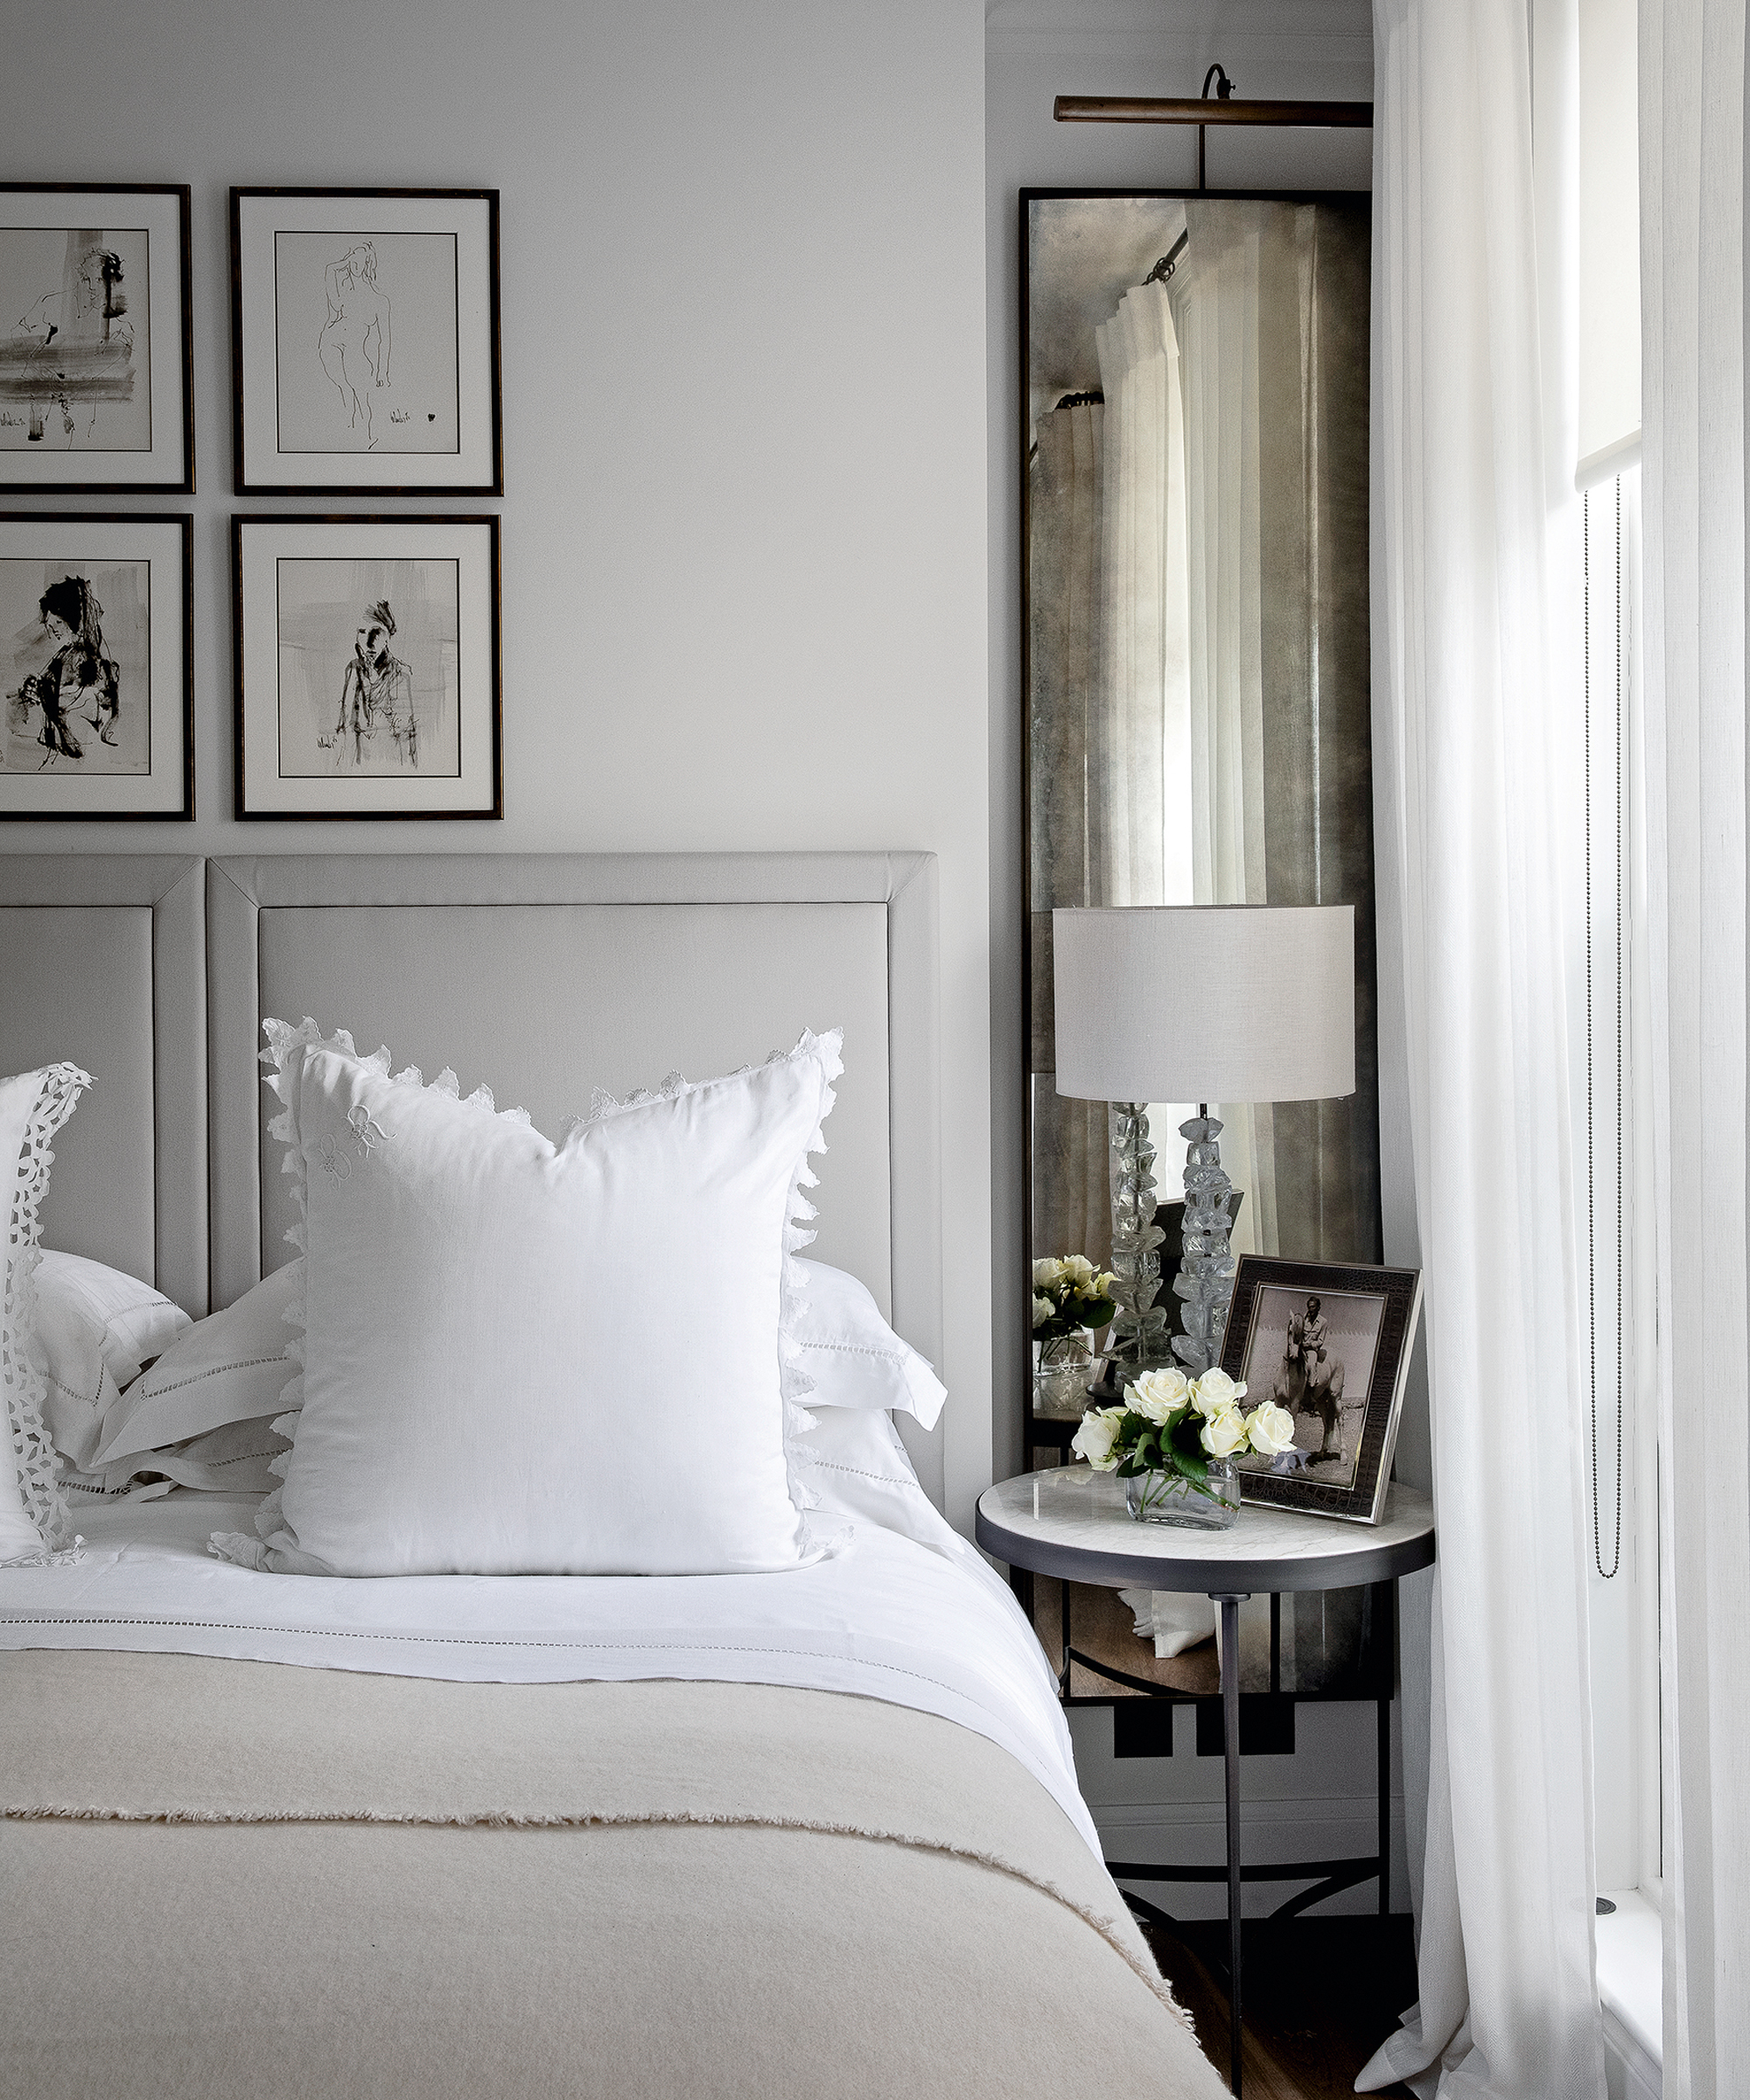 A bedroom color idea with white walls, dove grey headboard, white curtains, cream throw and tarnished black-framed mirror